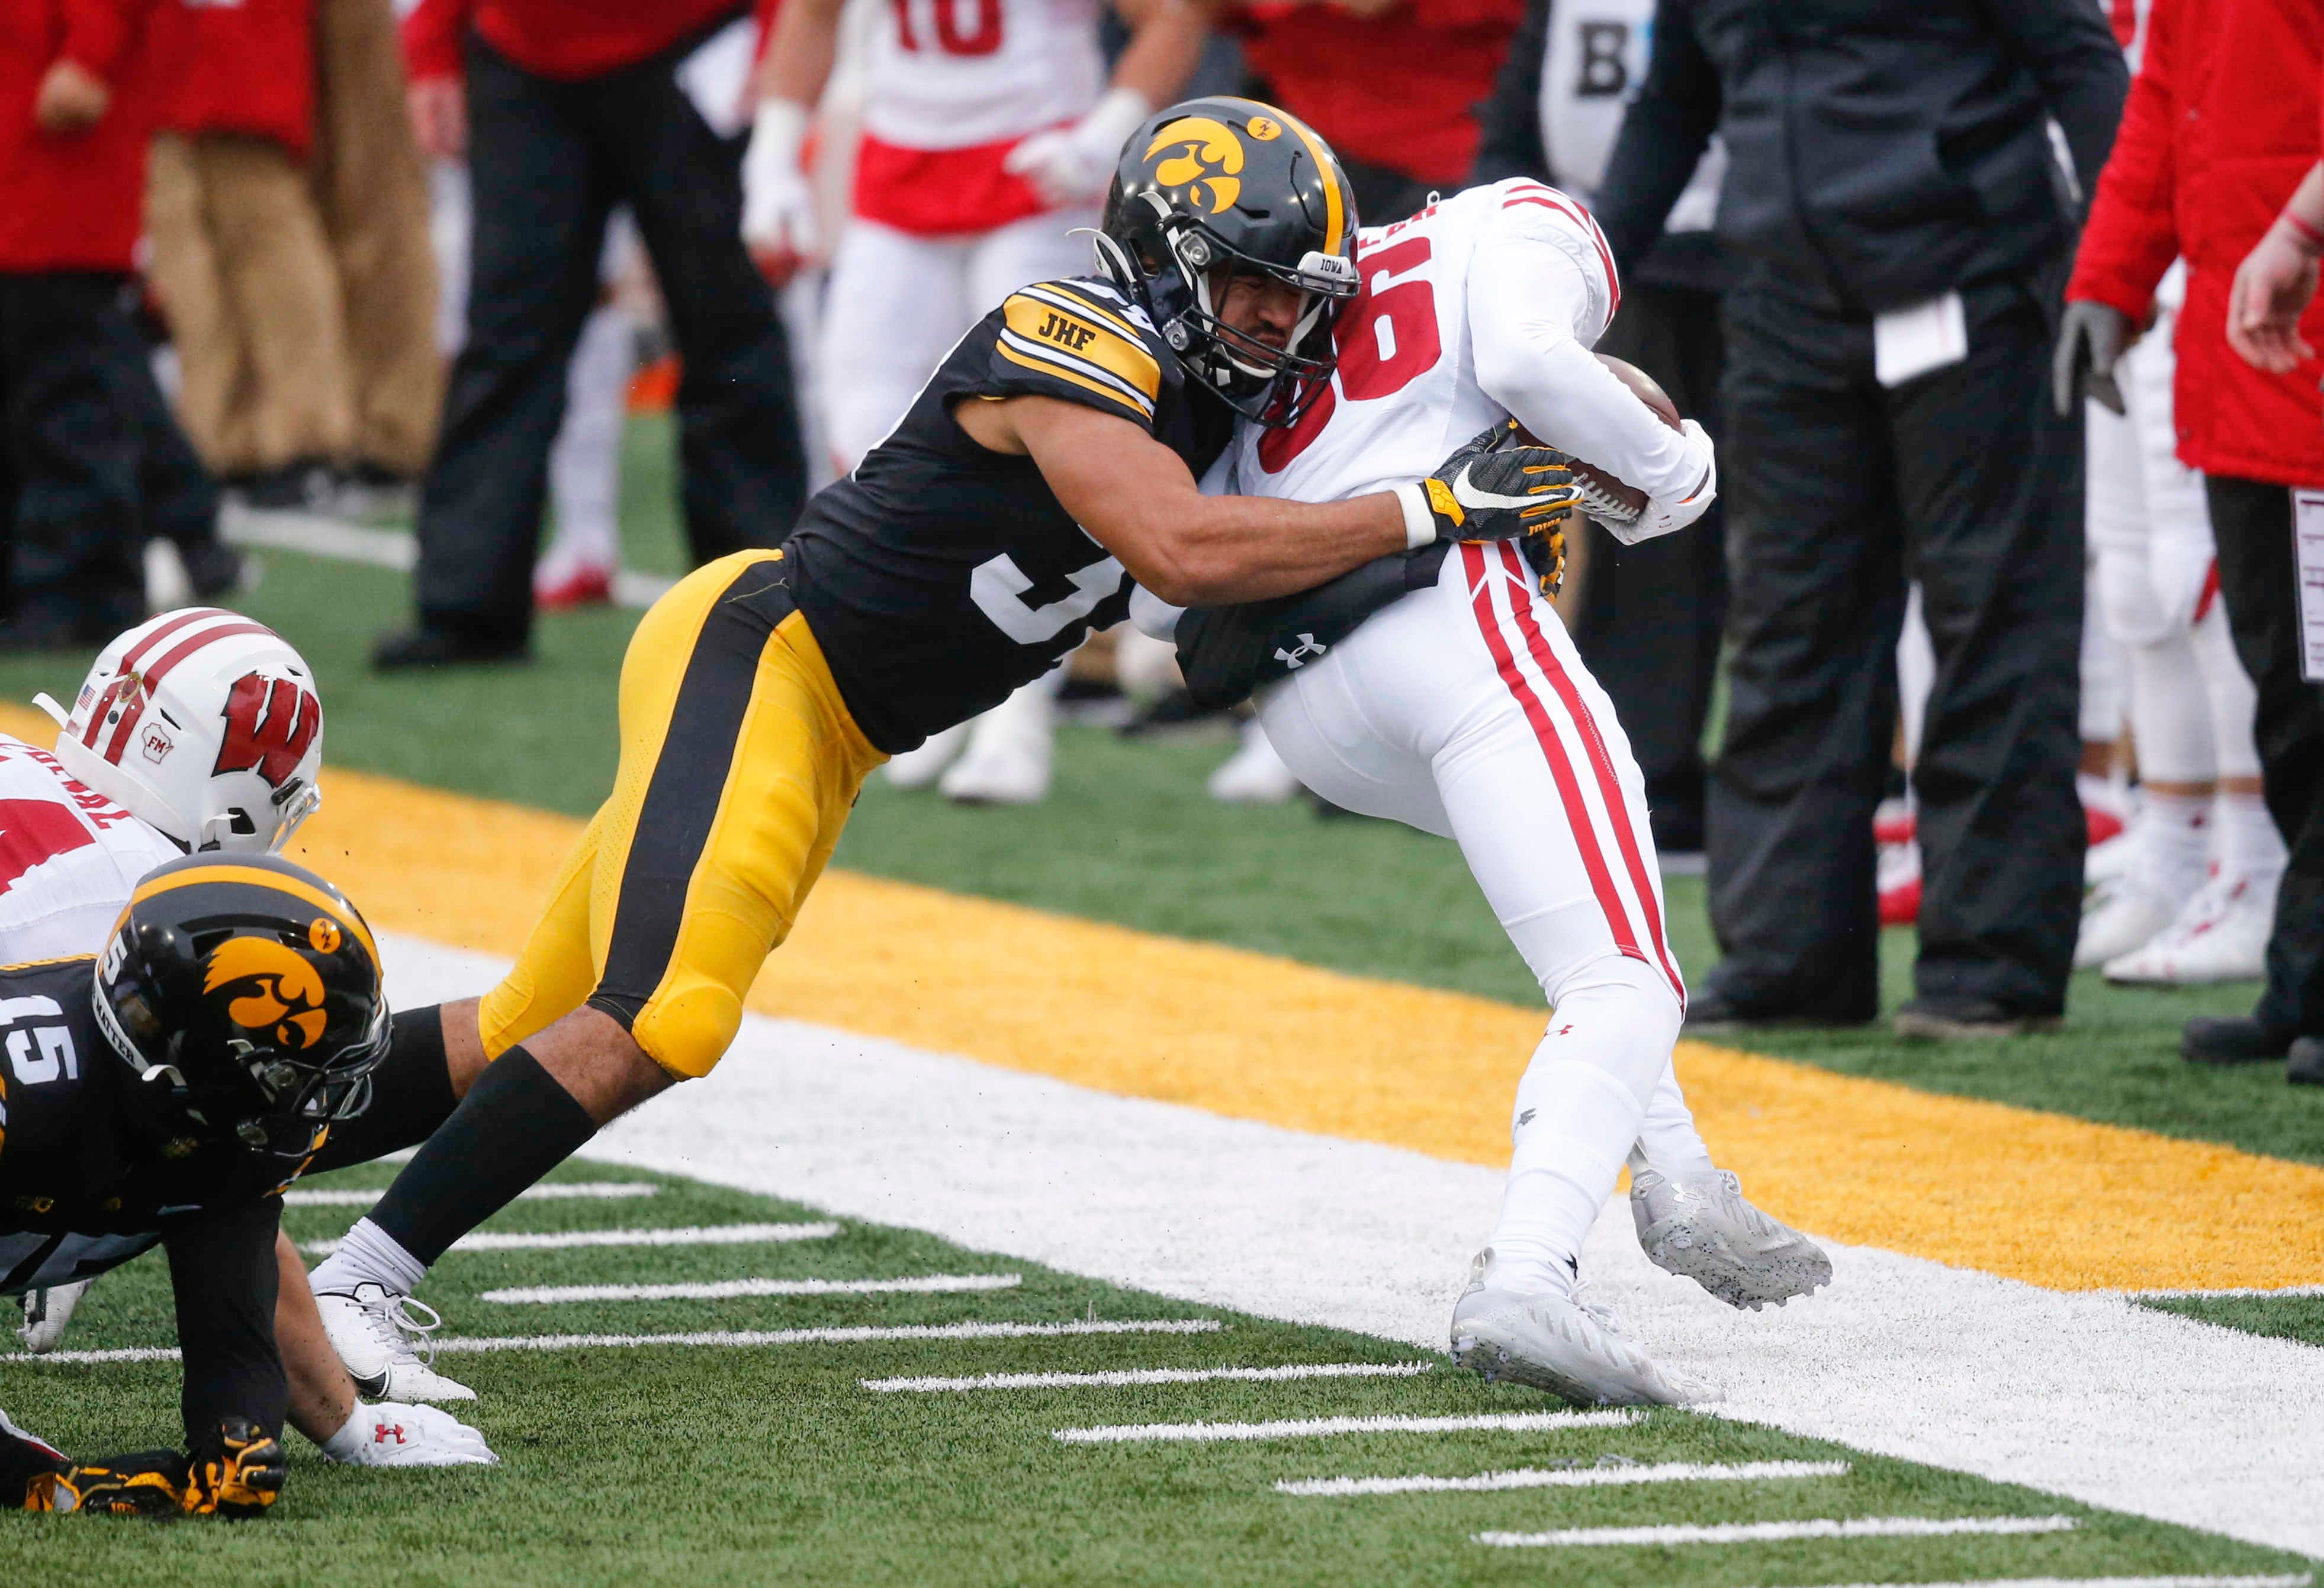 Iowa freshman defensive back Kyler Fisher hits Wisconsin' tight end Hayden Rucci out of bounds in the first quarter on Saturday, Dec. 12, 2020, at Kinnick Stadium in Iowa City, Iowa.